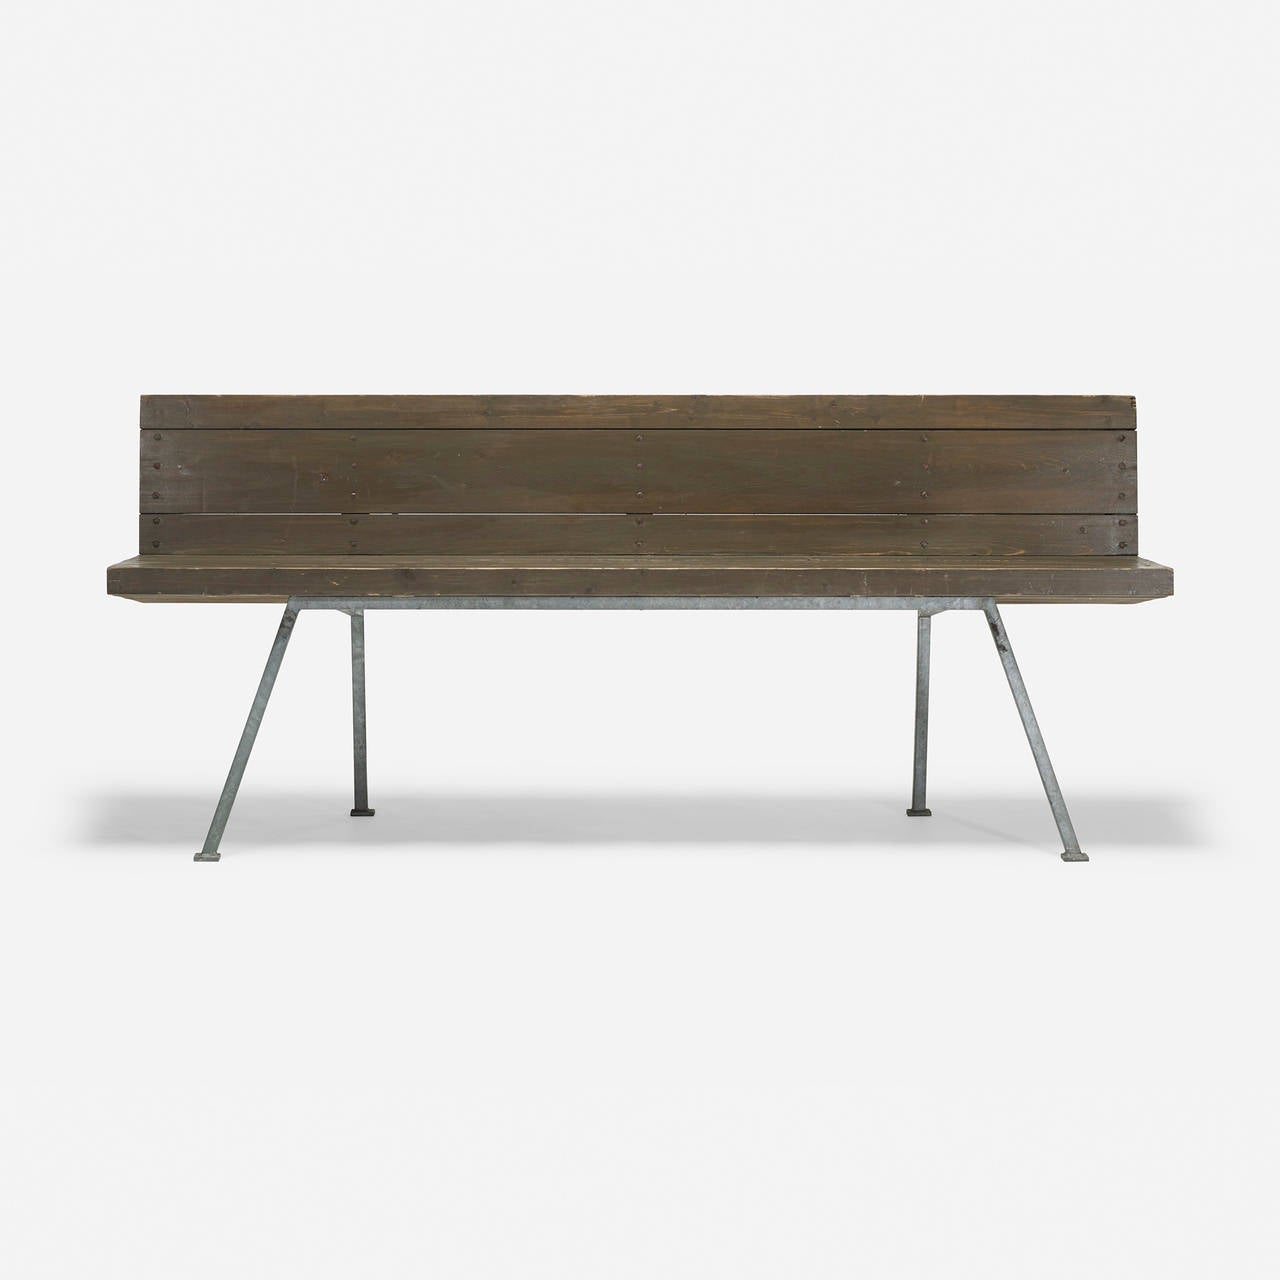 This bench, from the monastery he designed in Vaals, reveals van der Laan’s subtle, Minimalist aesthetic.

Provenance: Abbey Vaals, The Netherlands | Private collection.